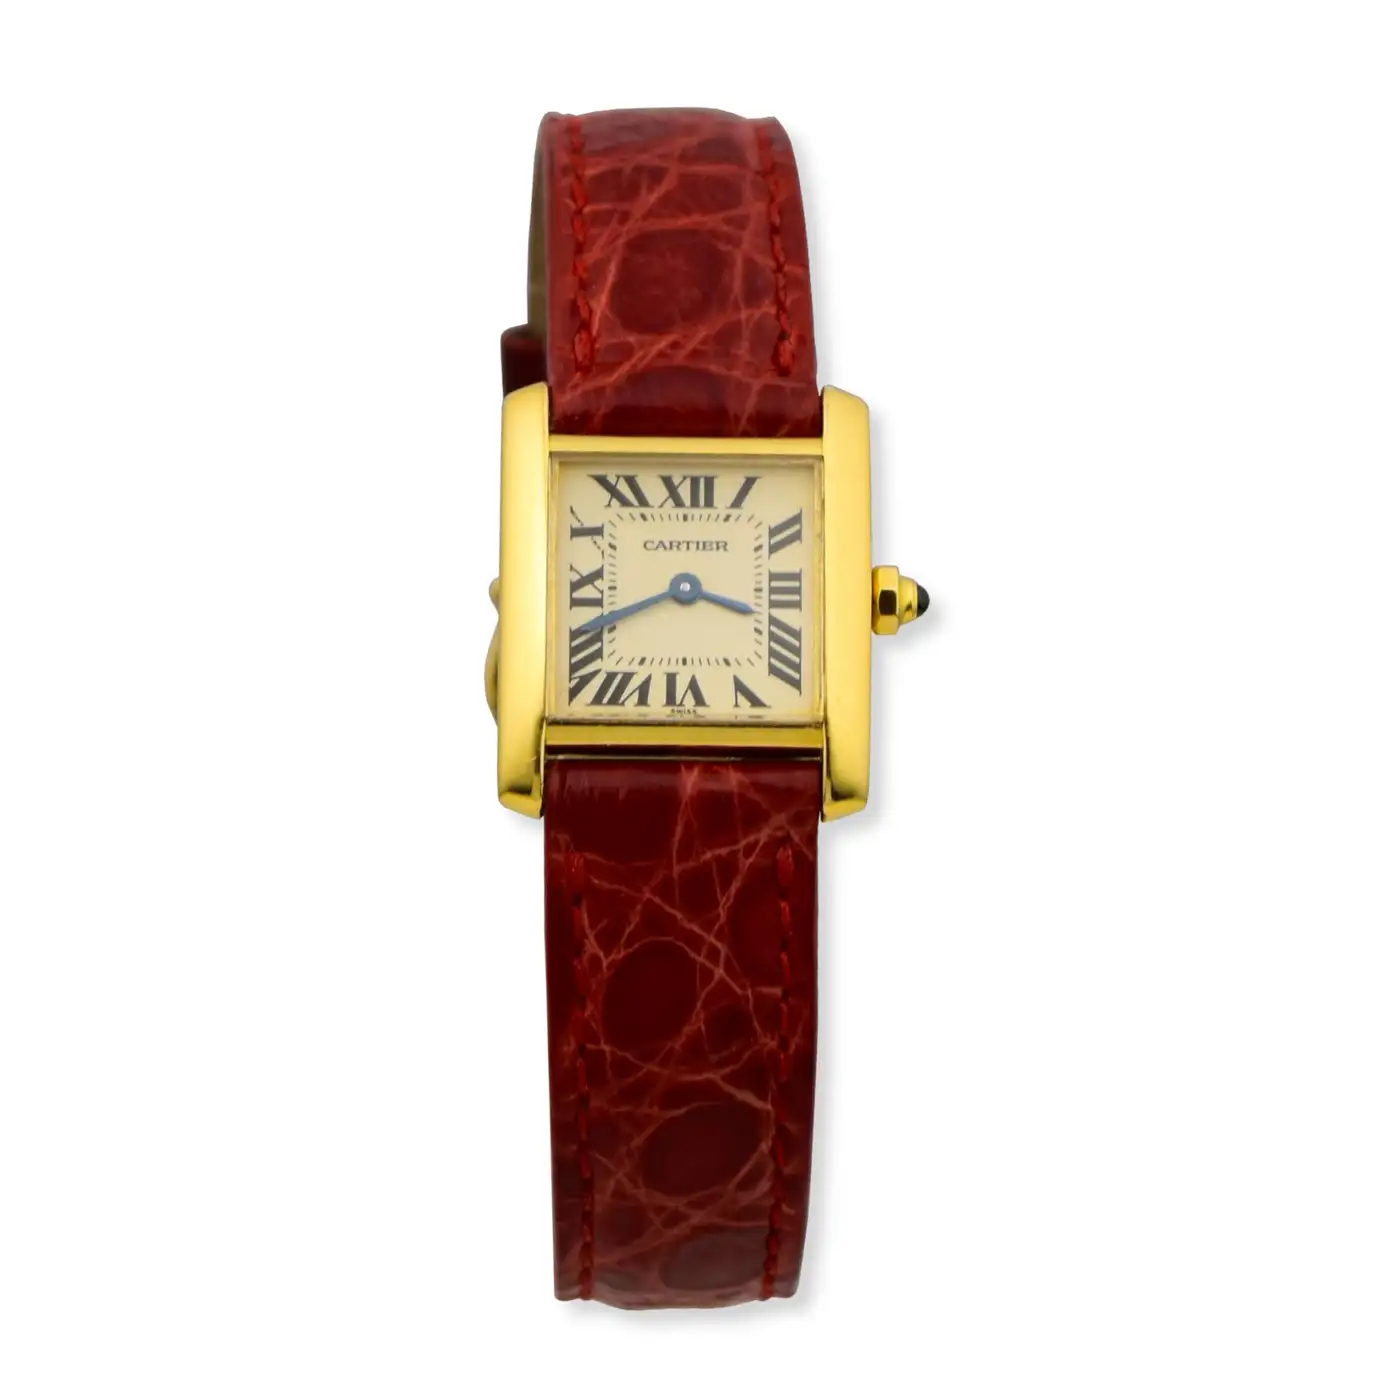 Cartier-Tank-Montres-Francaise-in-18k-Yellow-Gold-Watch-1.webp